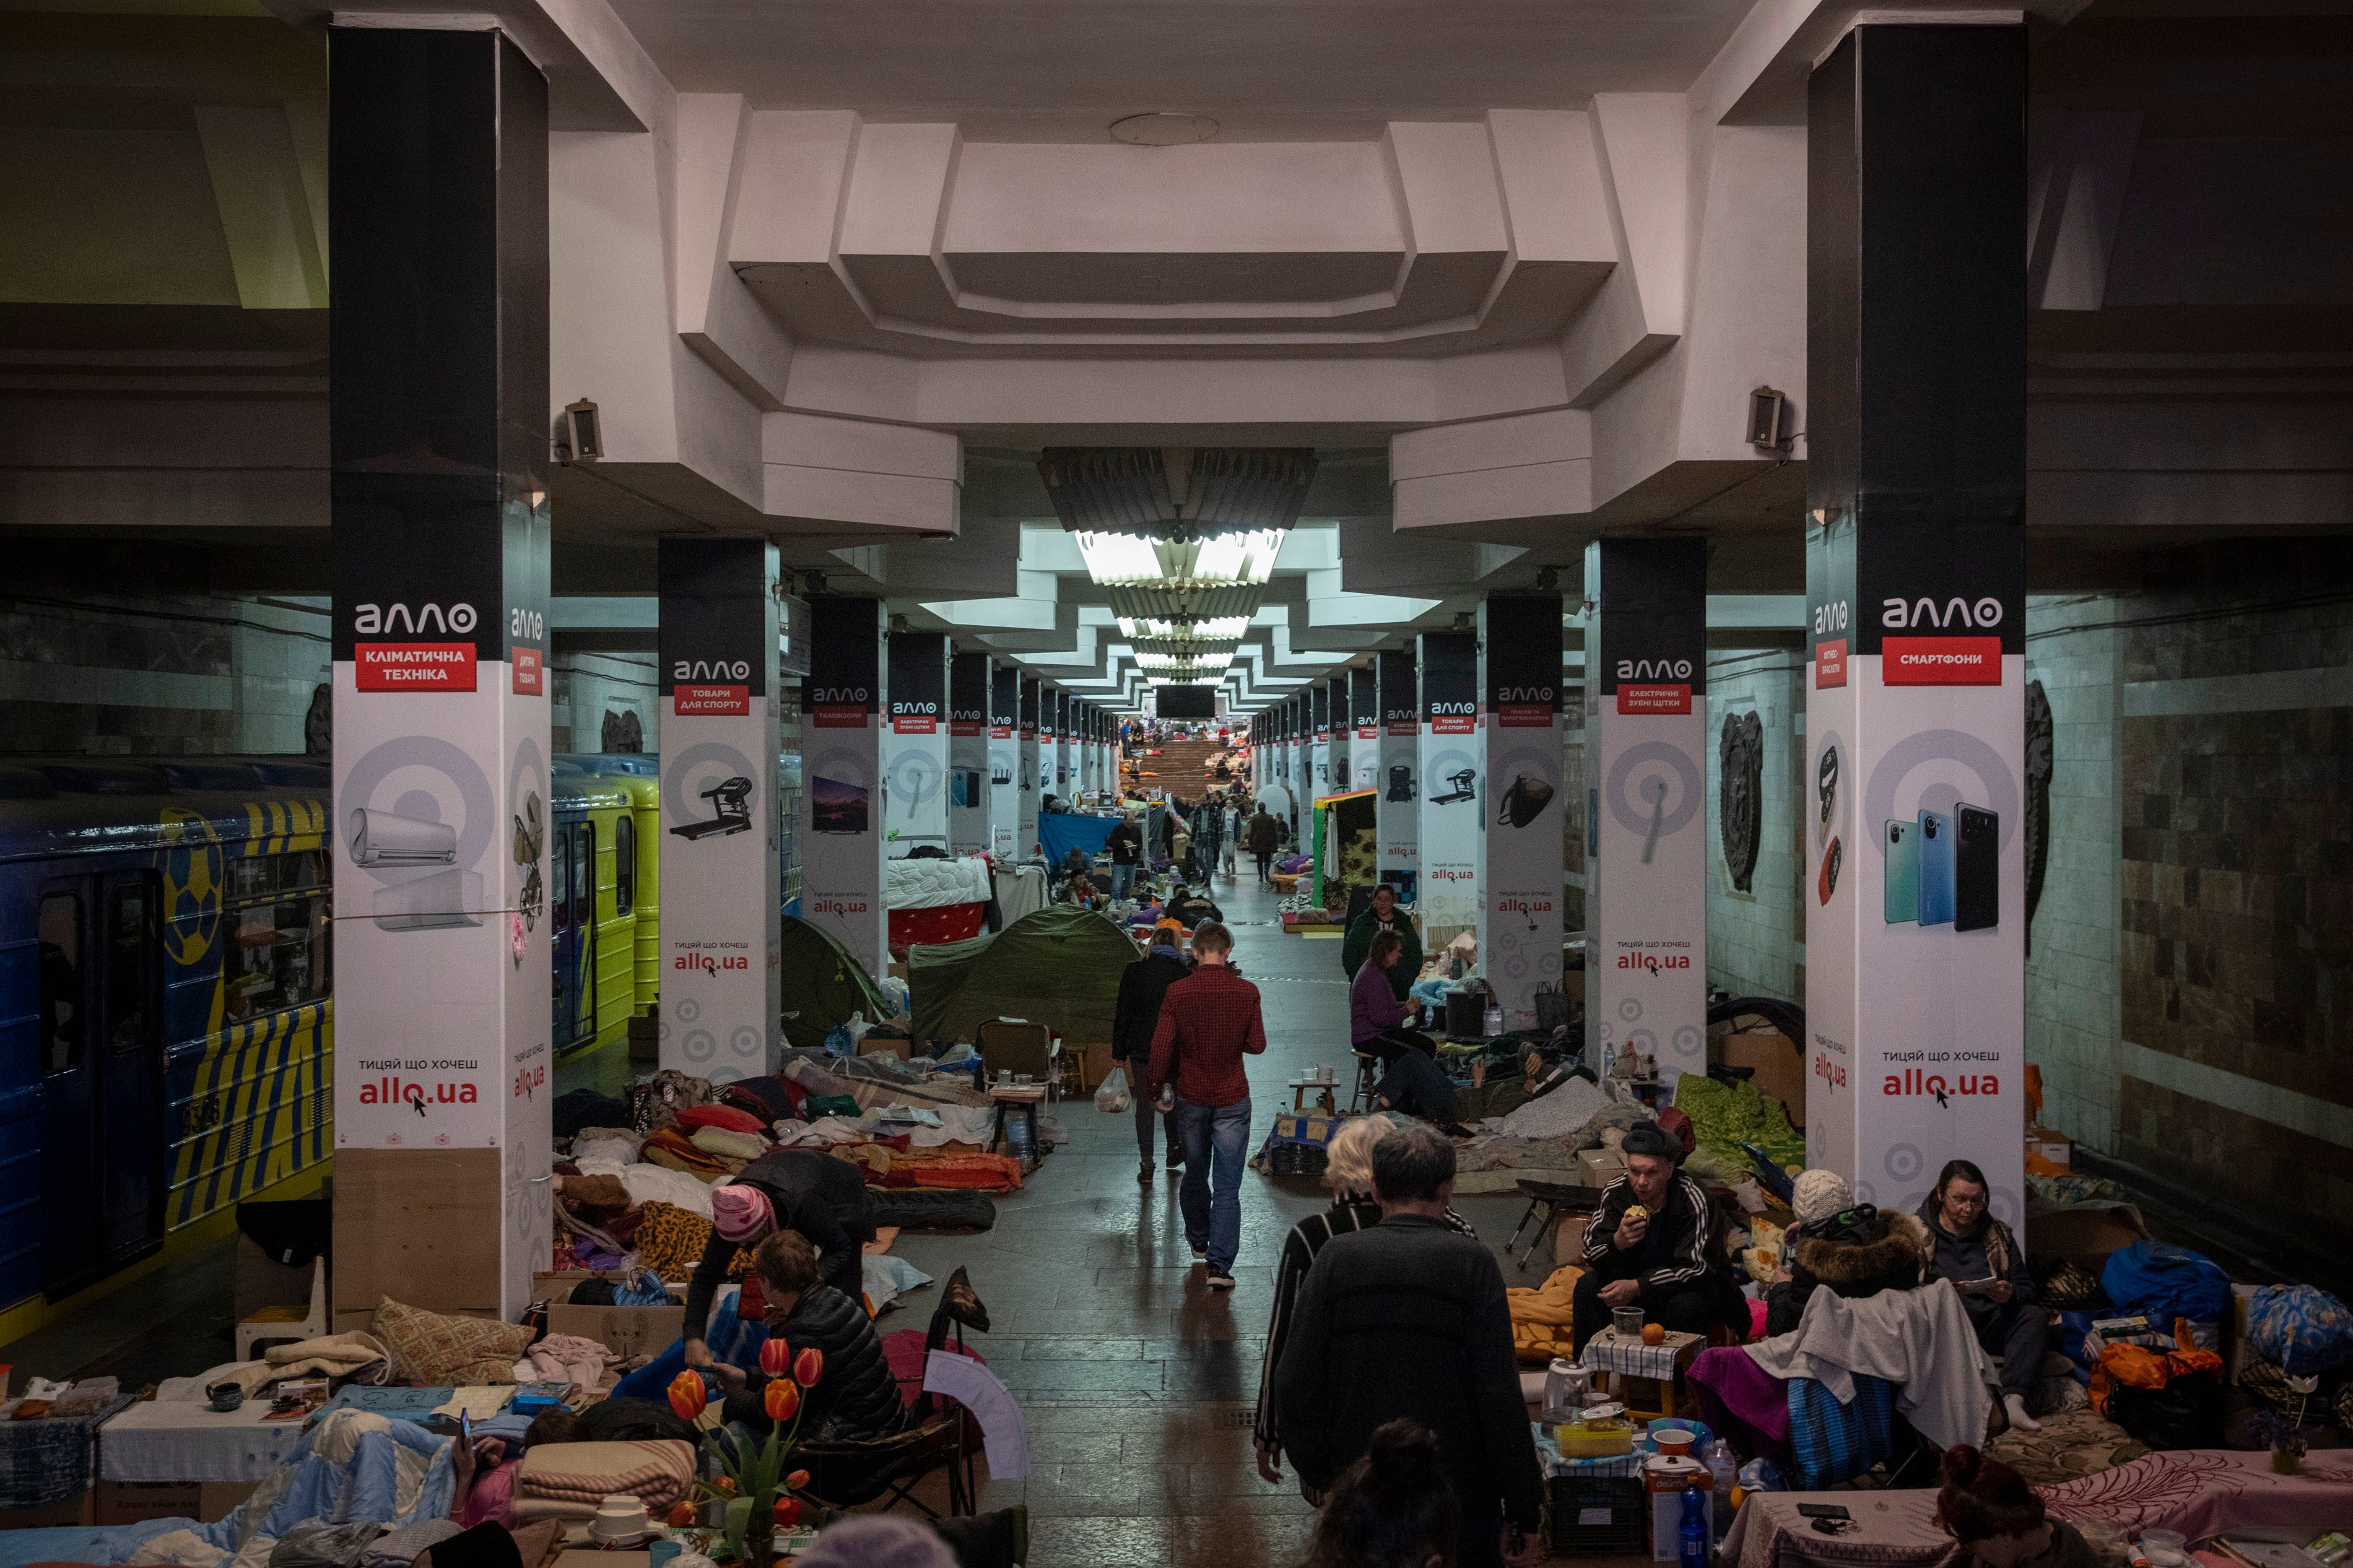 An interior view of the metro station in Kharkiv